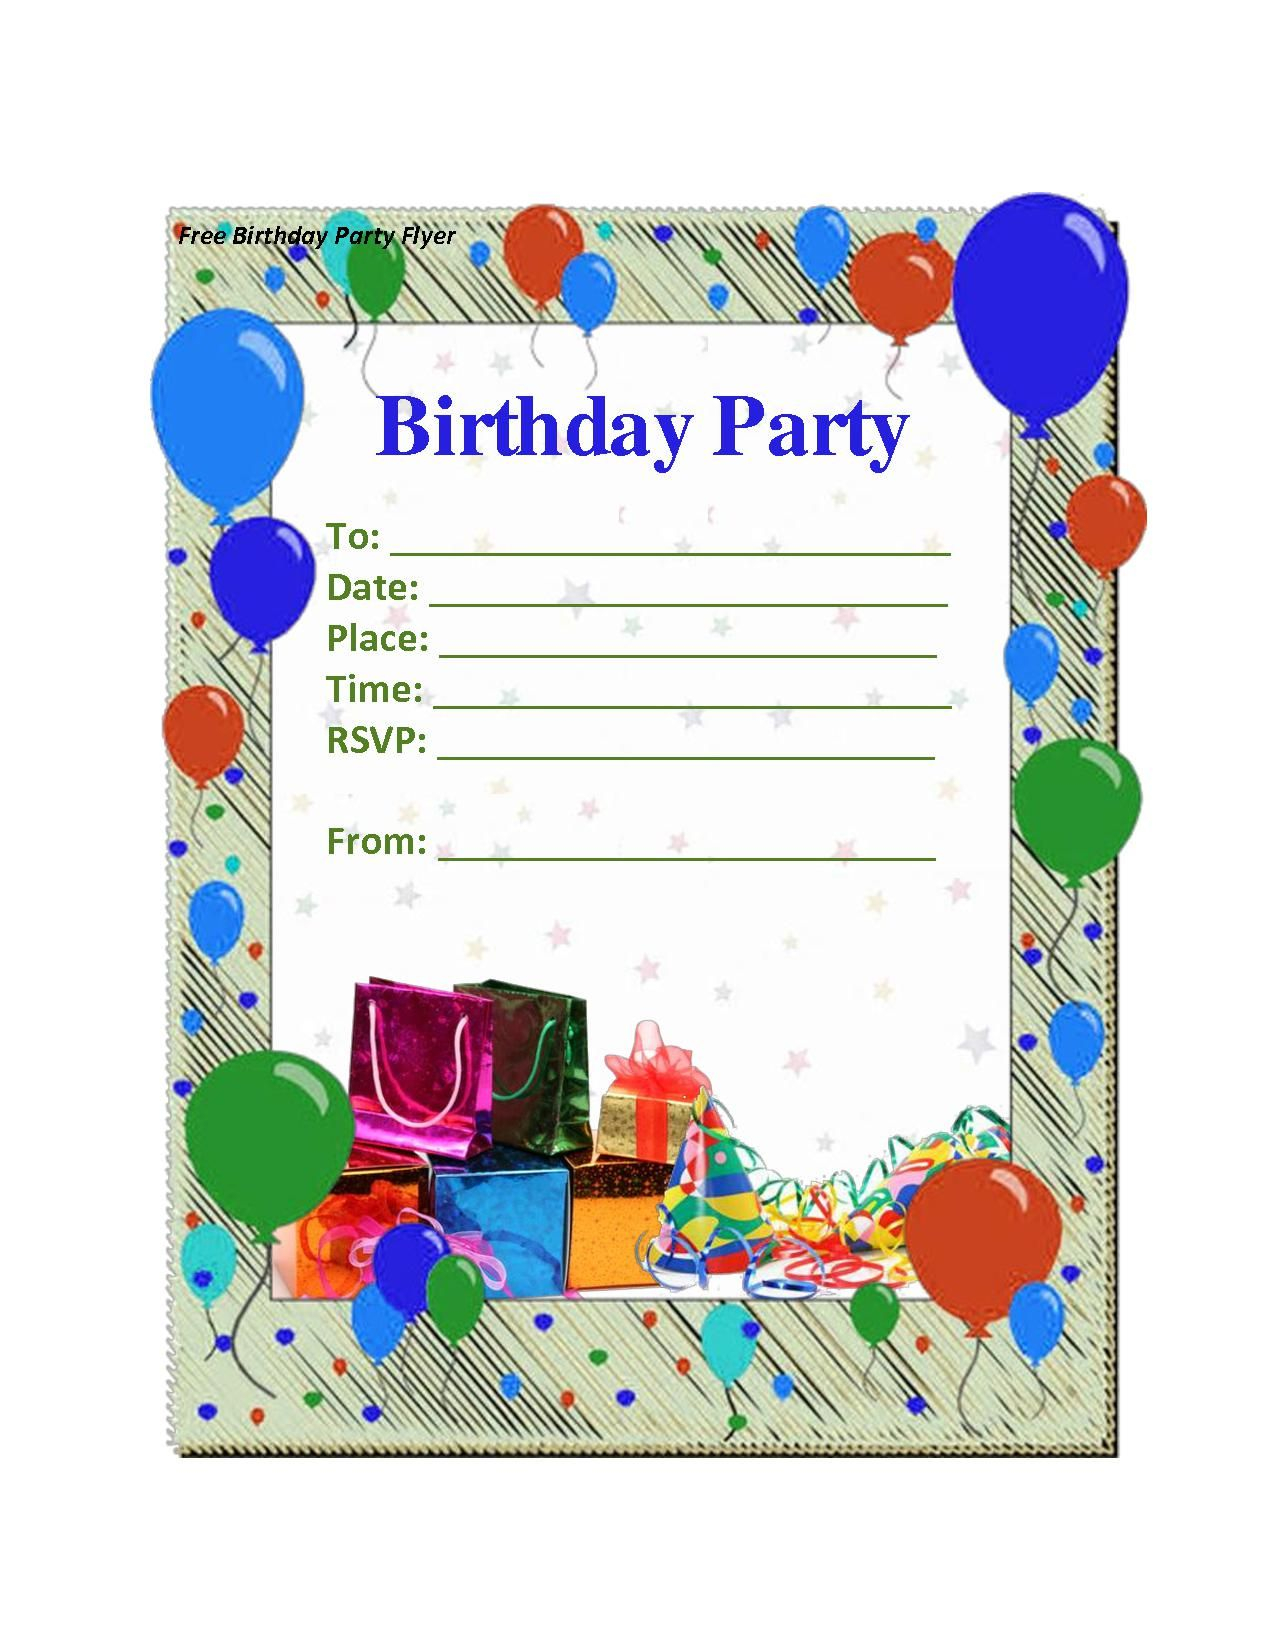 Free Party Invitation Maker Online Star Wars Party Invitation In inside dimensions 1275 X 1650